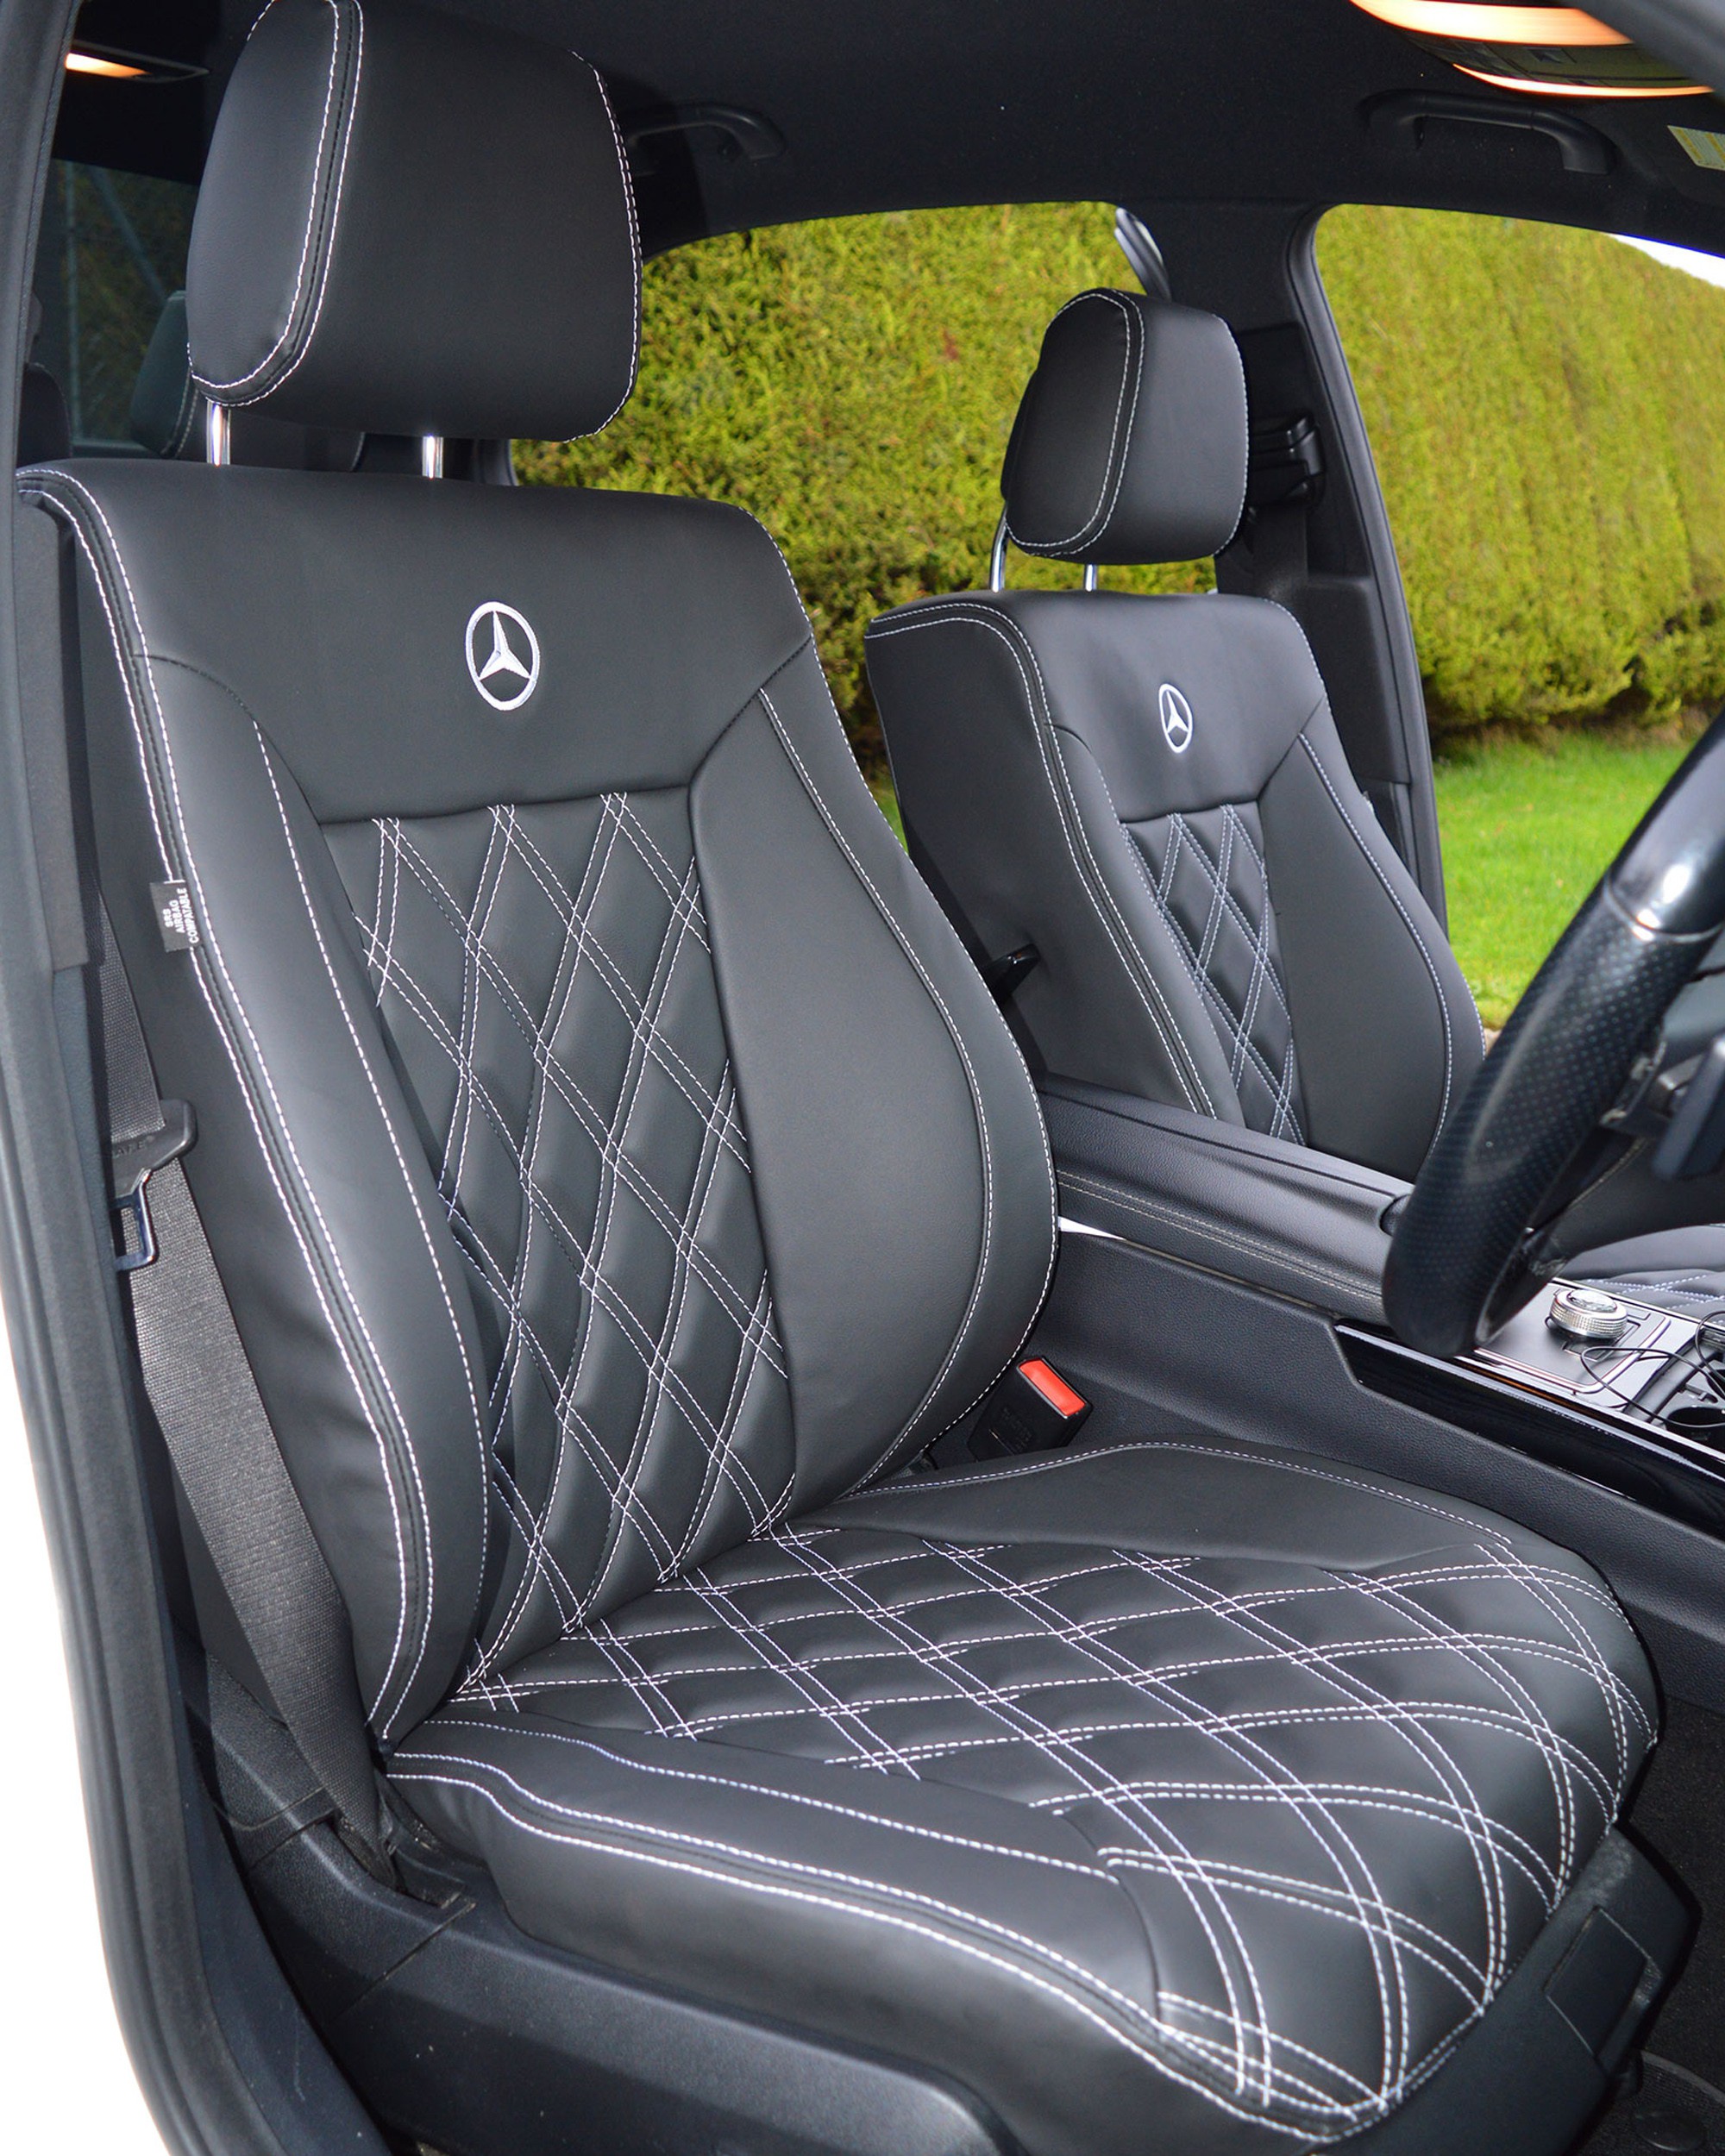 MERCEDES-BENZ M-CLASS ALL YEARS BLACK REAR WATERPROOF SEAT COVERS